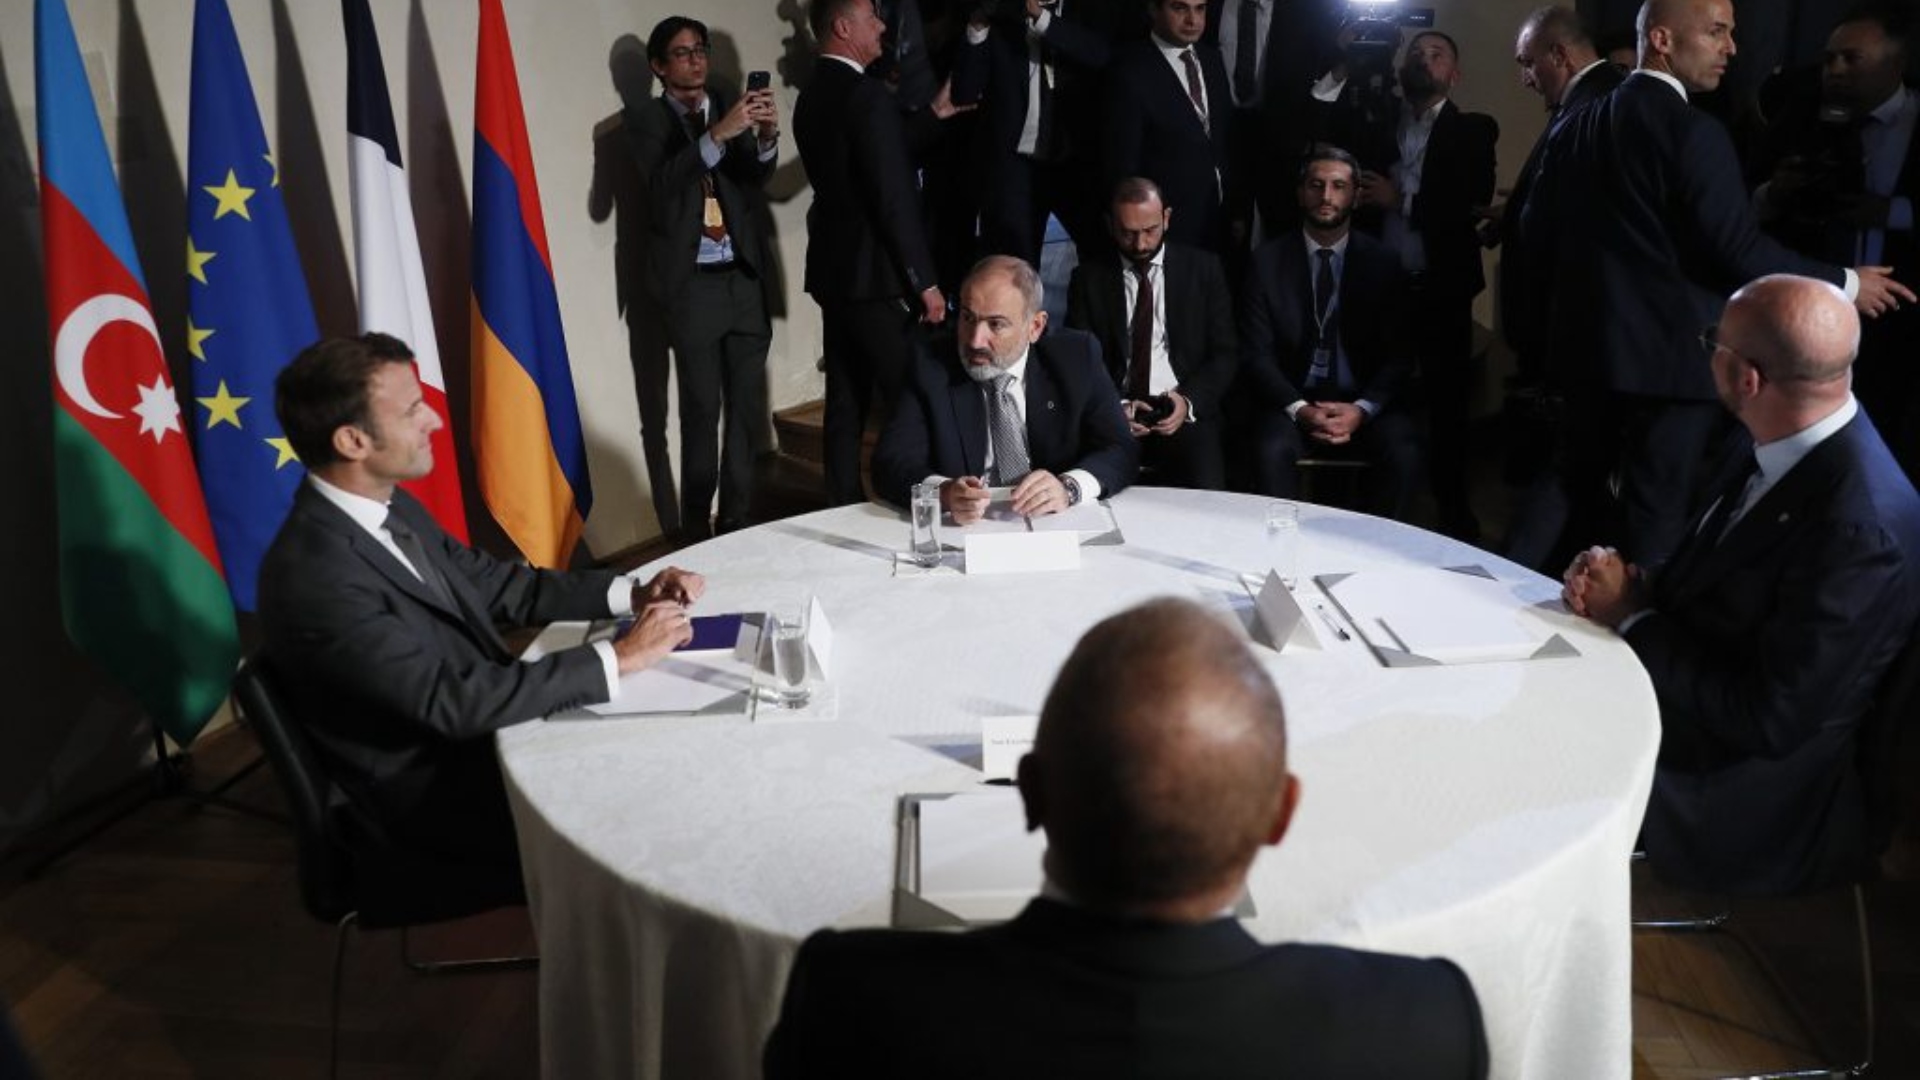 The peace agreement is unlikely to address any of the fundamental issues in the Armenia-Azerbaijan context